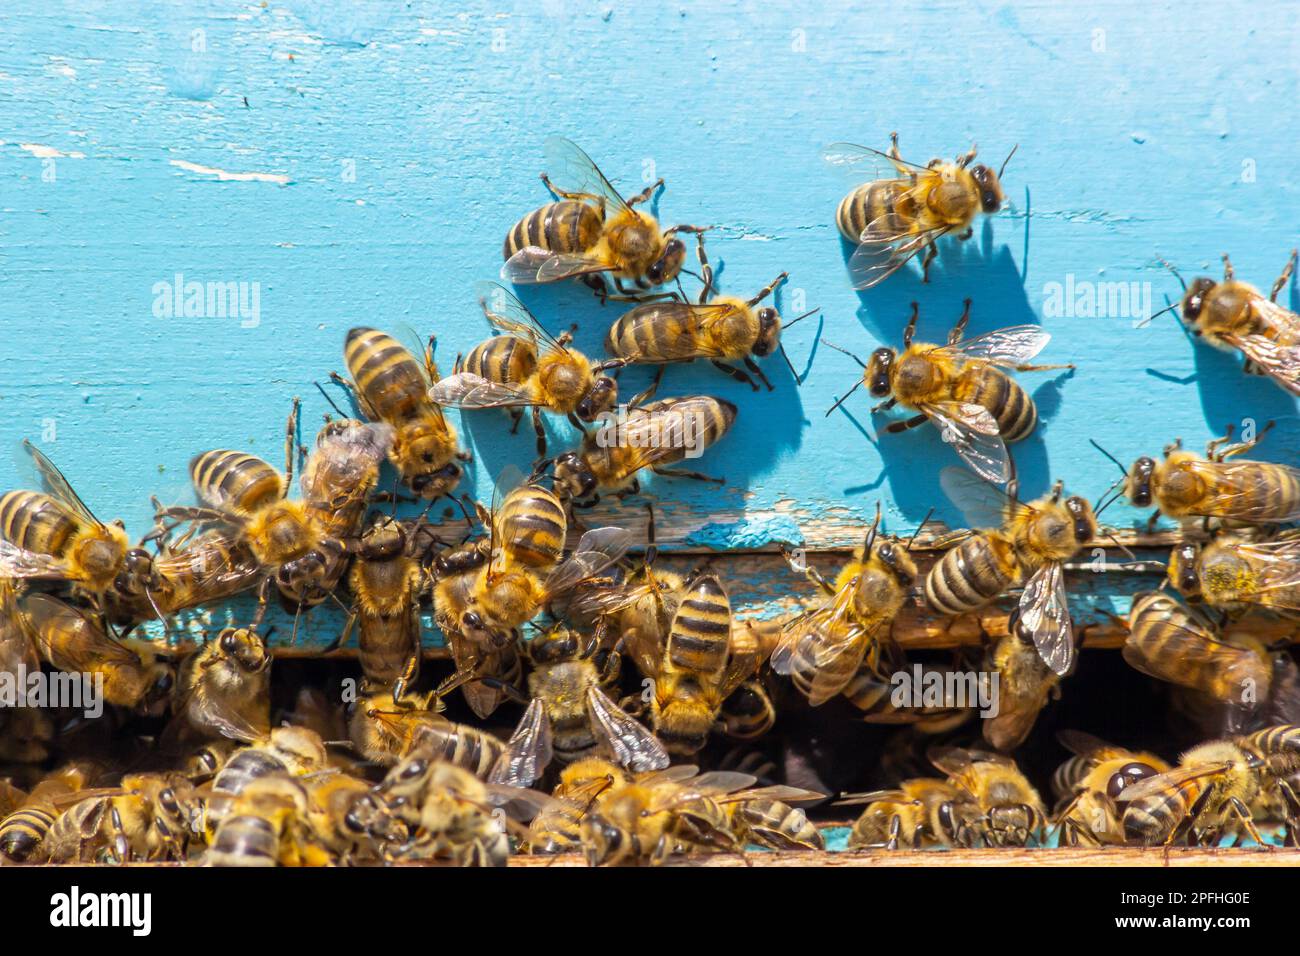 swarm of honey bees flying around beehive. Bees returning from collecting honey fly back to the hive. Honey bees on home apiary, apiculture concept. Stock Photo